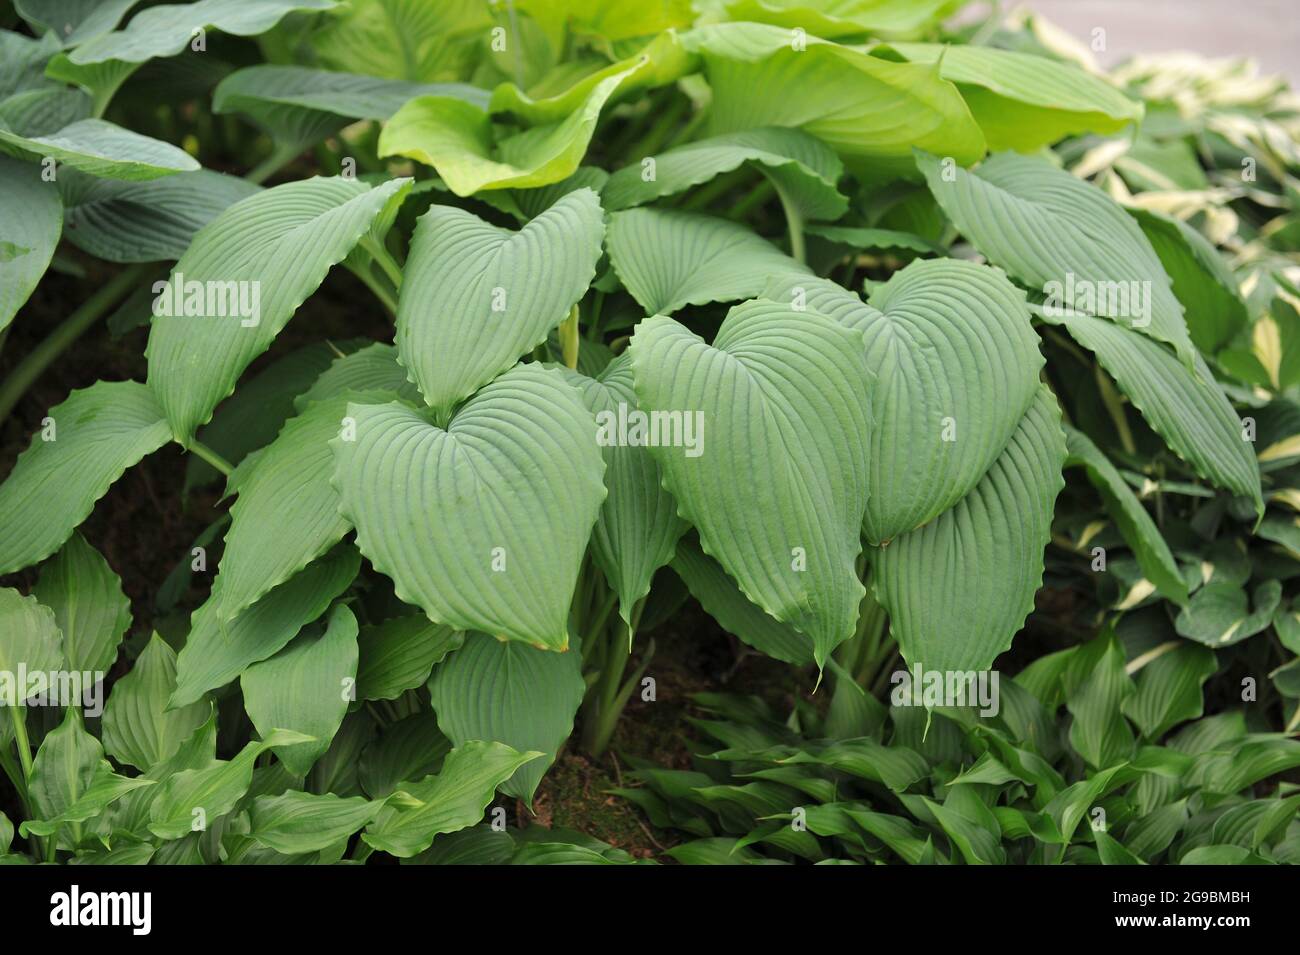 Giant Hosta Niagara Falls with large green leaves grows in a garden in May Stock Photo